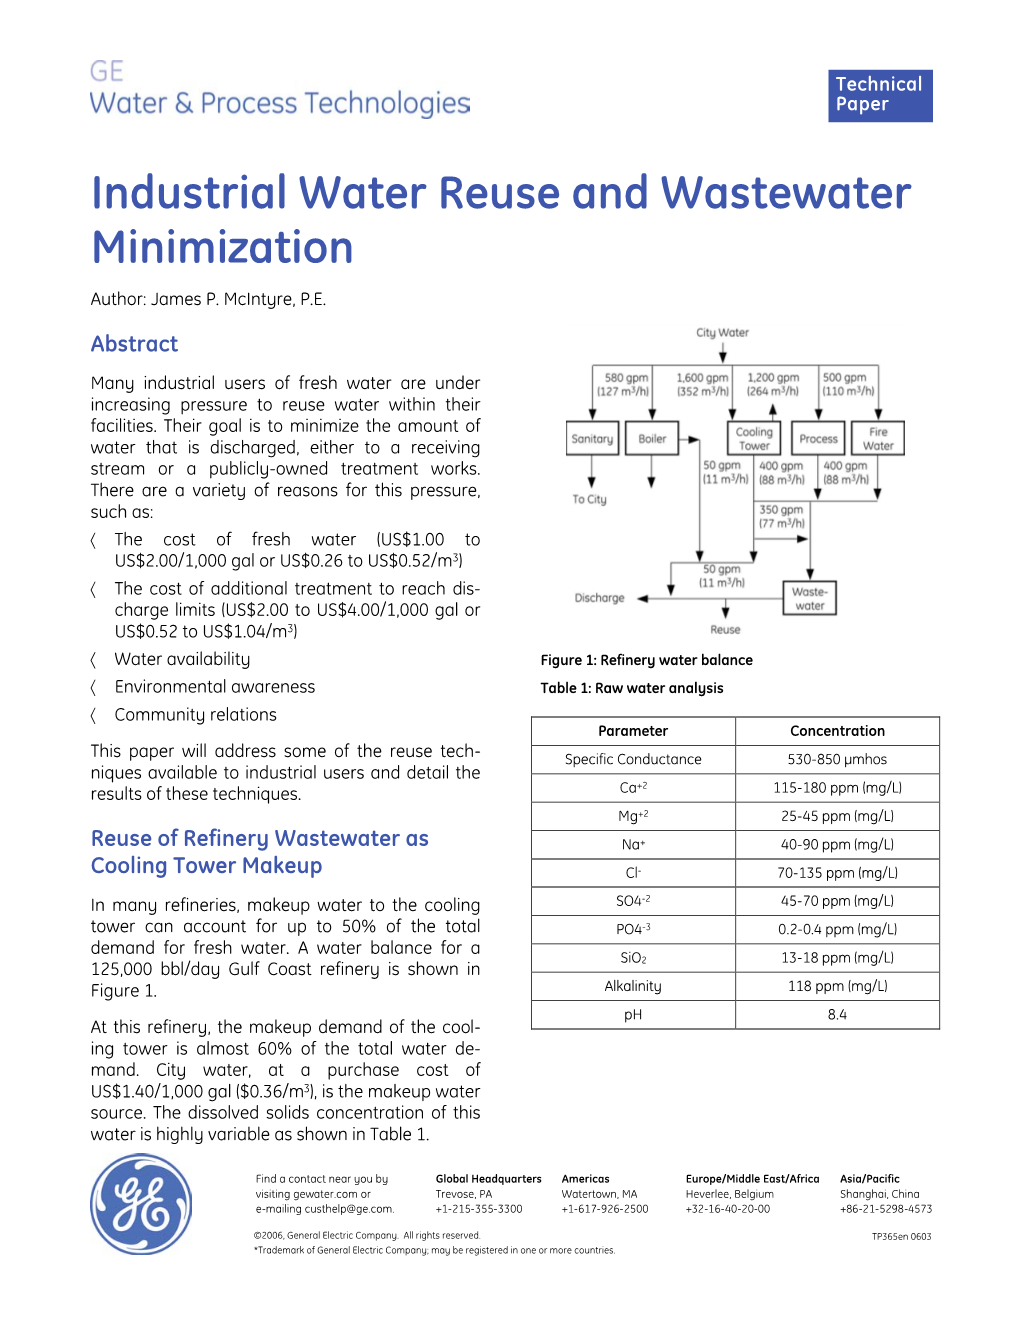 Water Reuse and Wastewater Minimization Author: James P